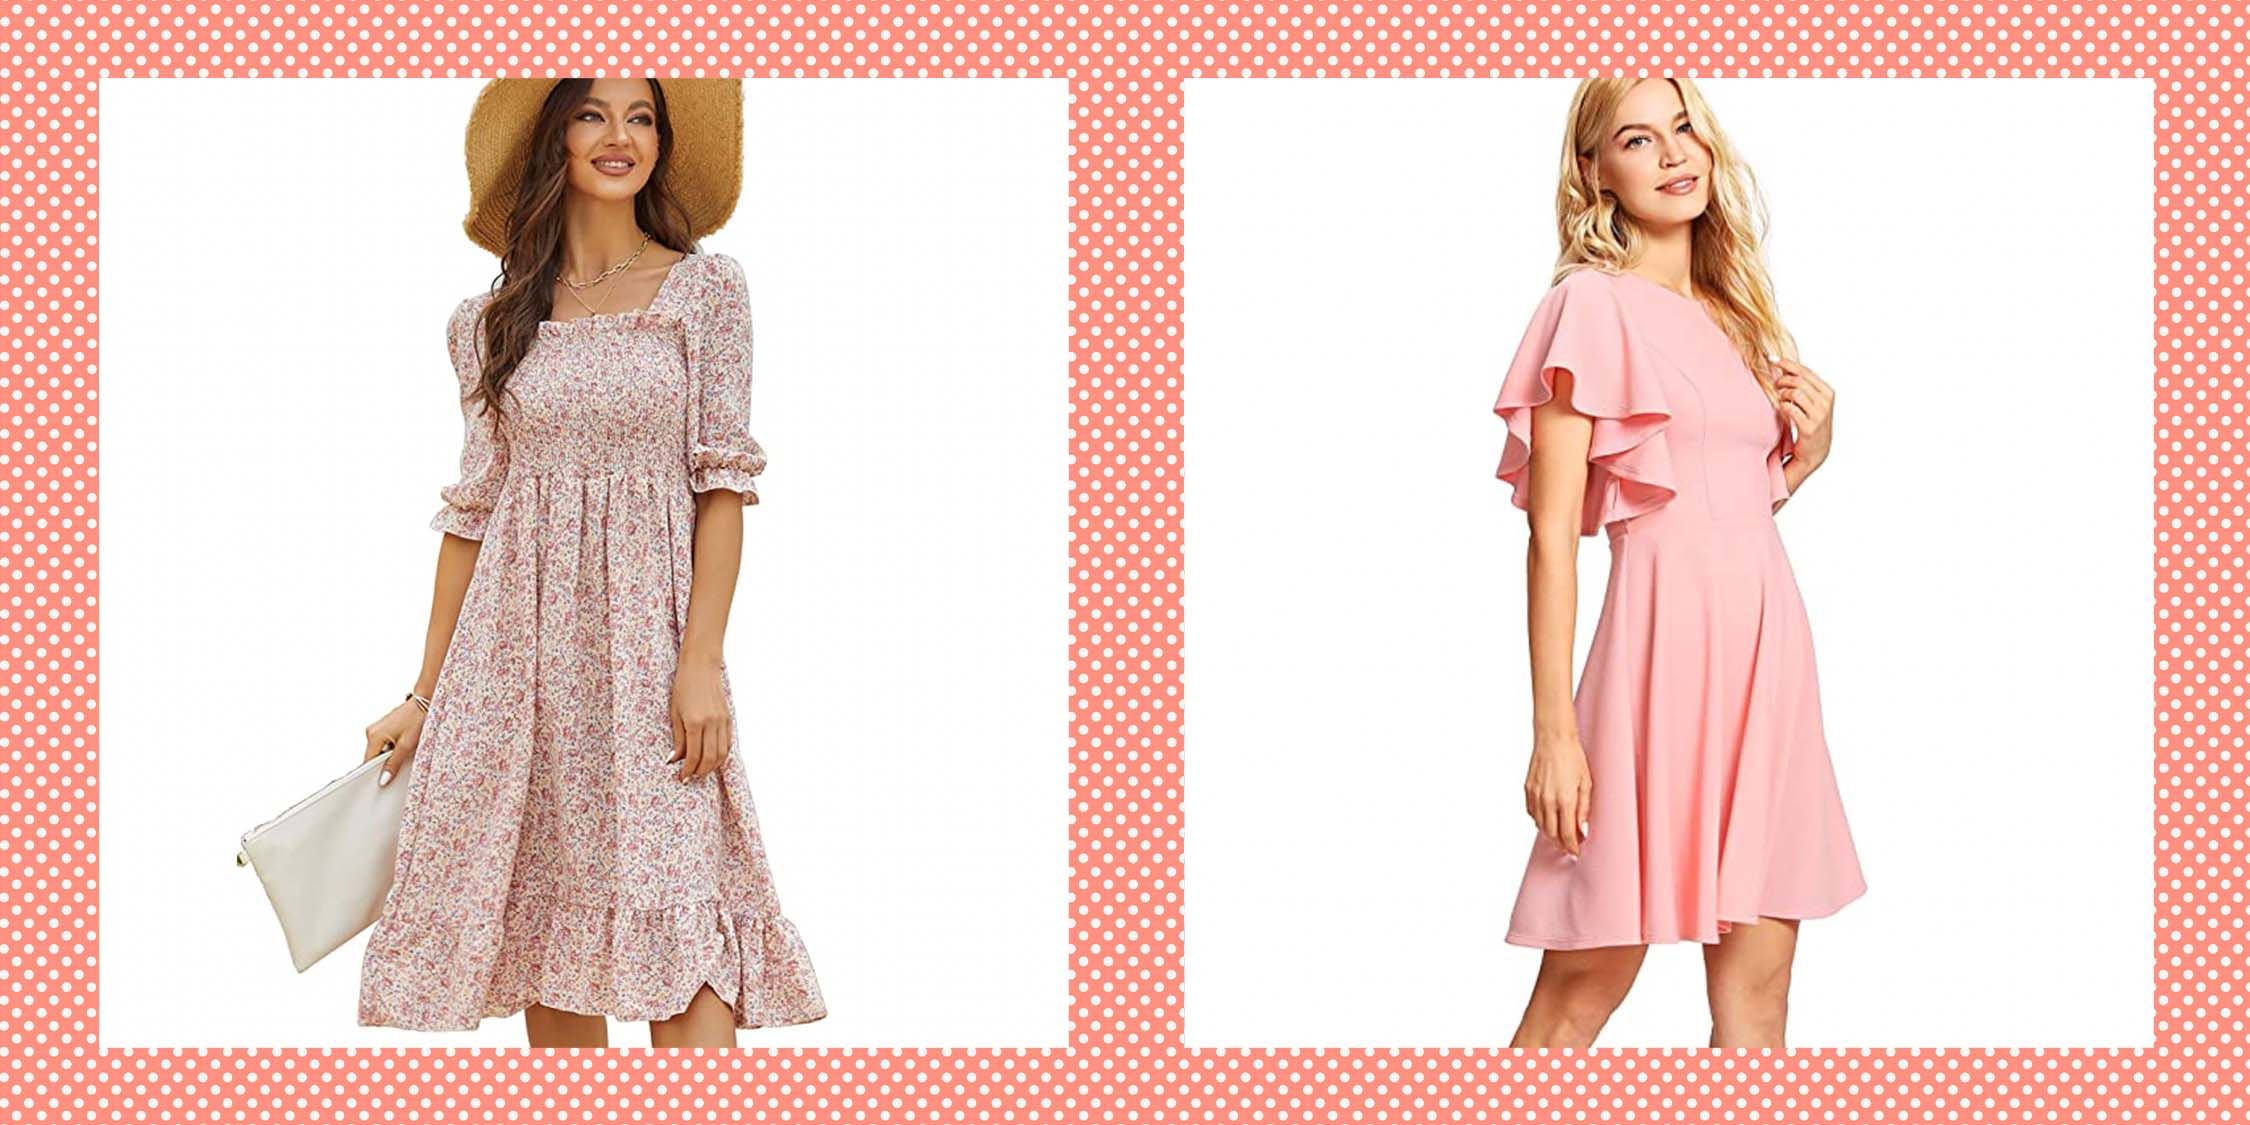 The best Macy's dresses to buy - Reviewed